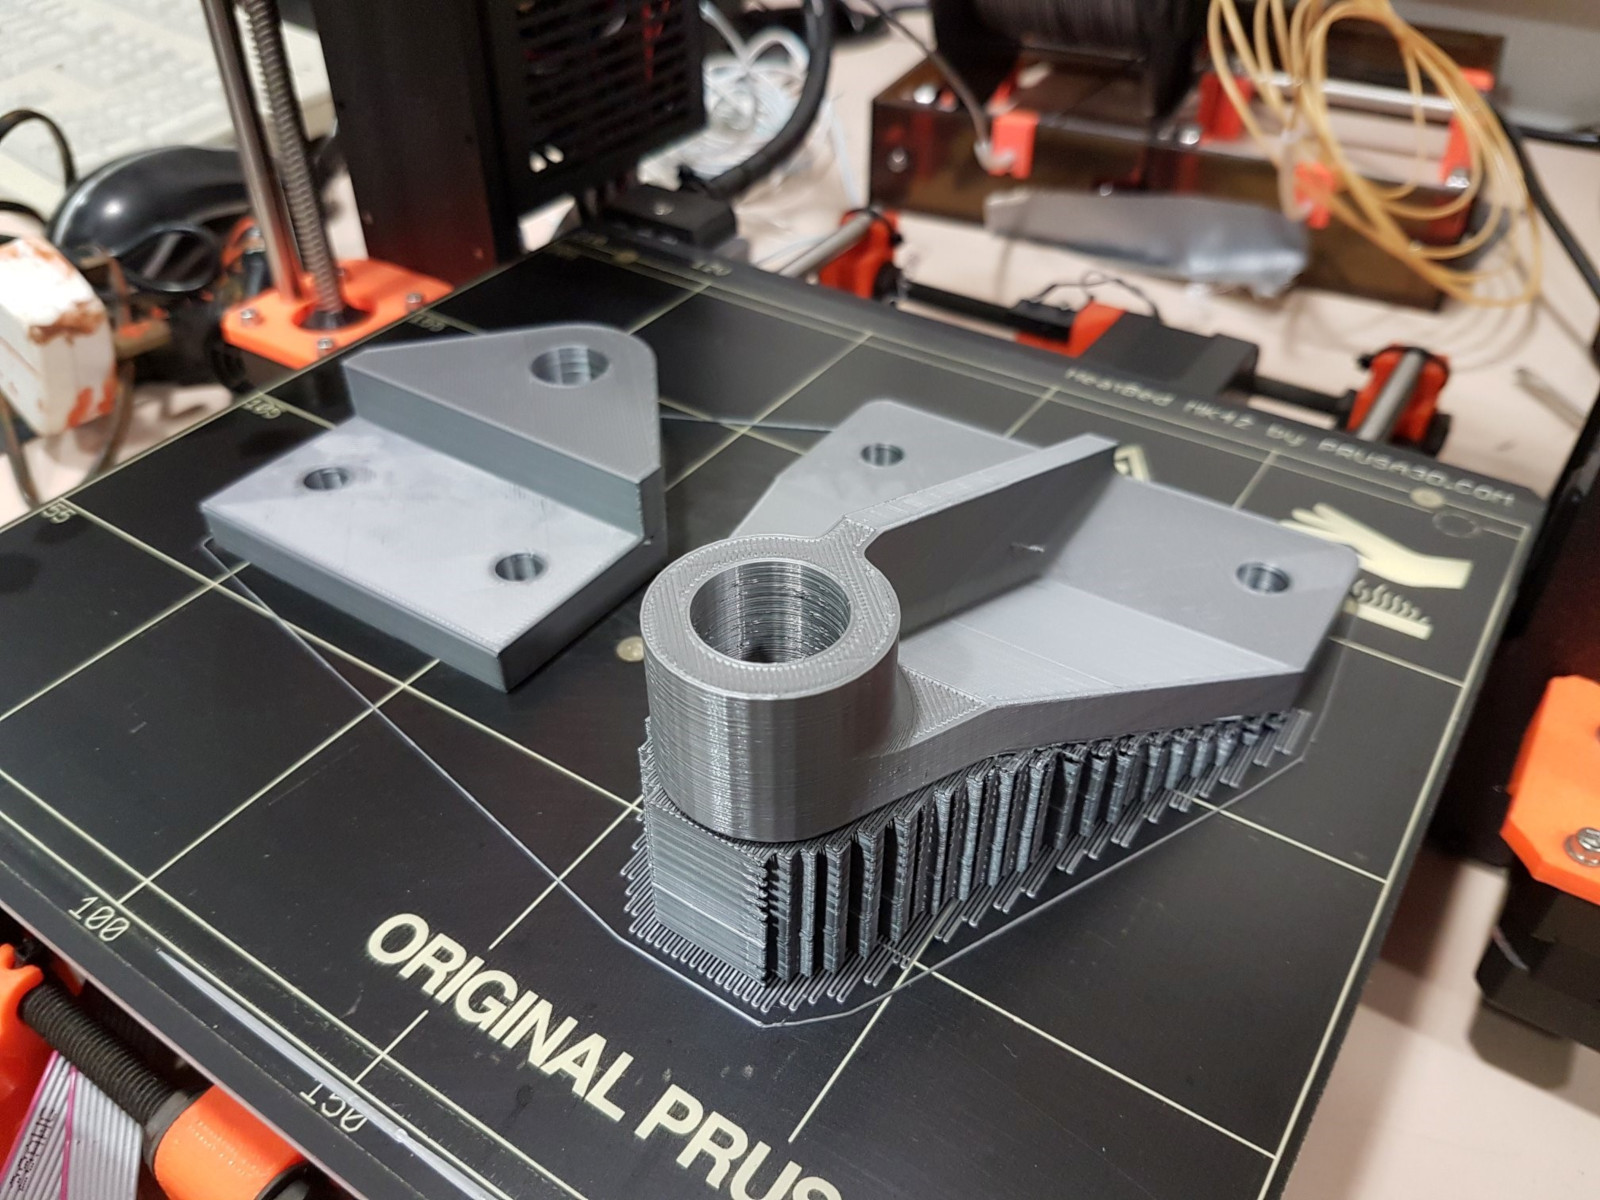 Our 3D printer printing a plastic bracket for our Skeoch cycle car project